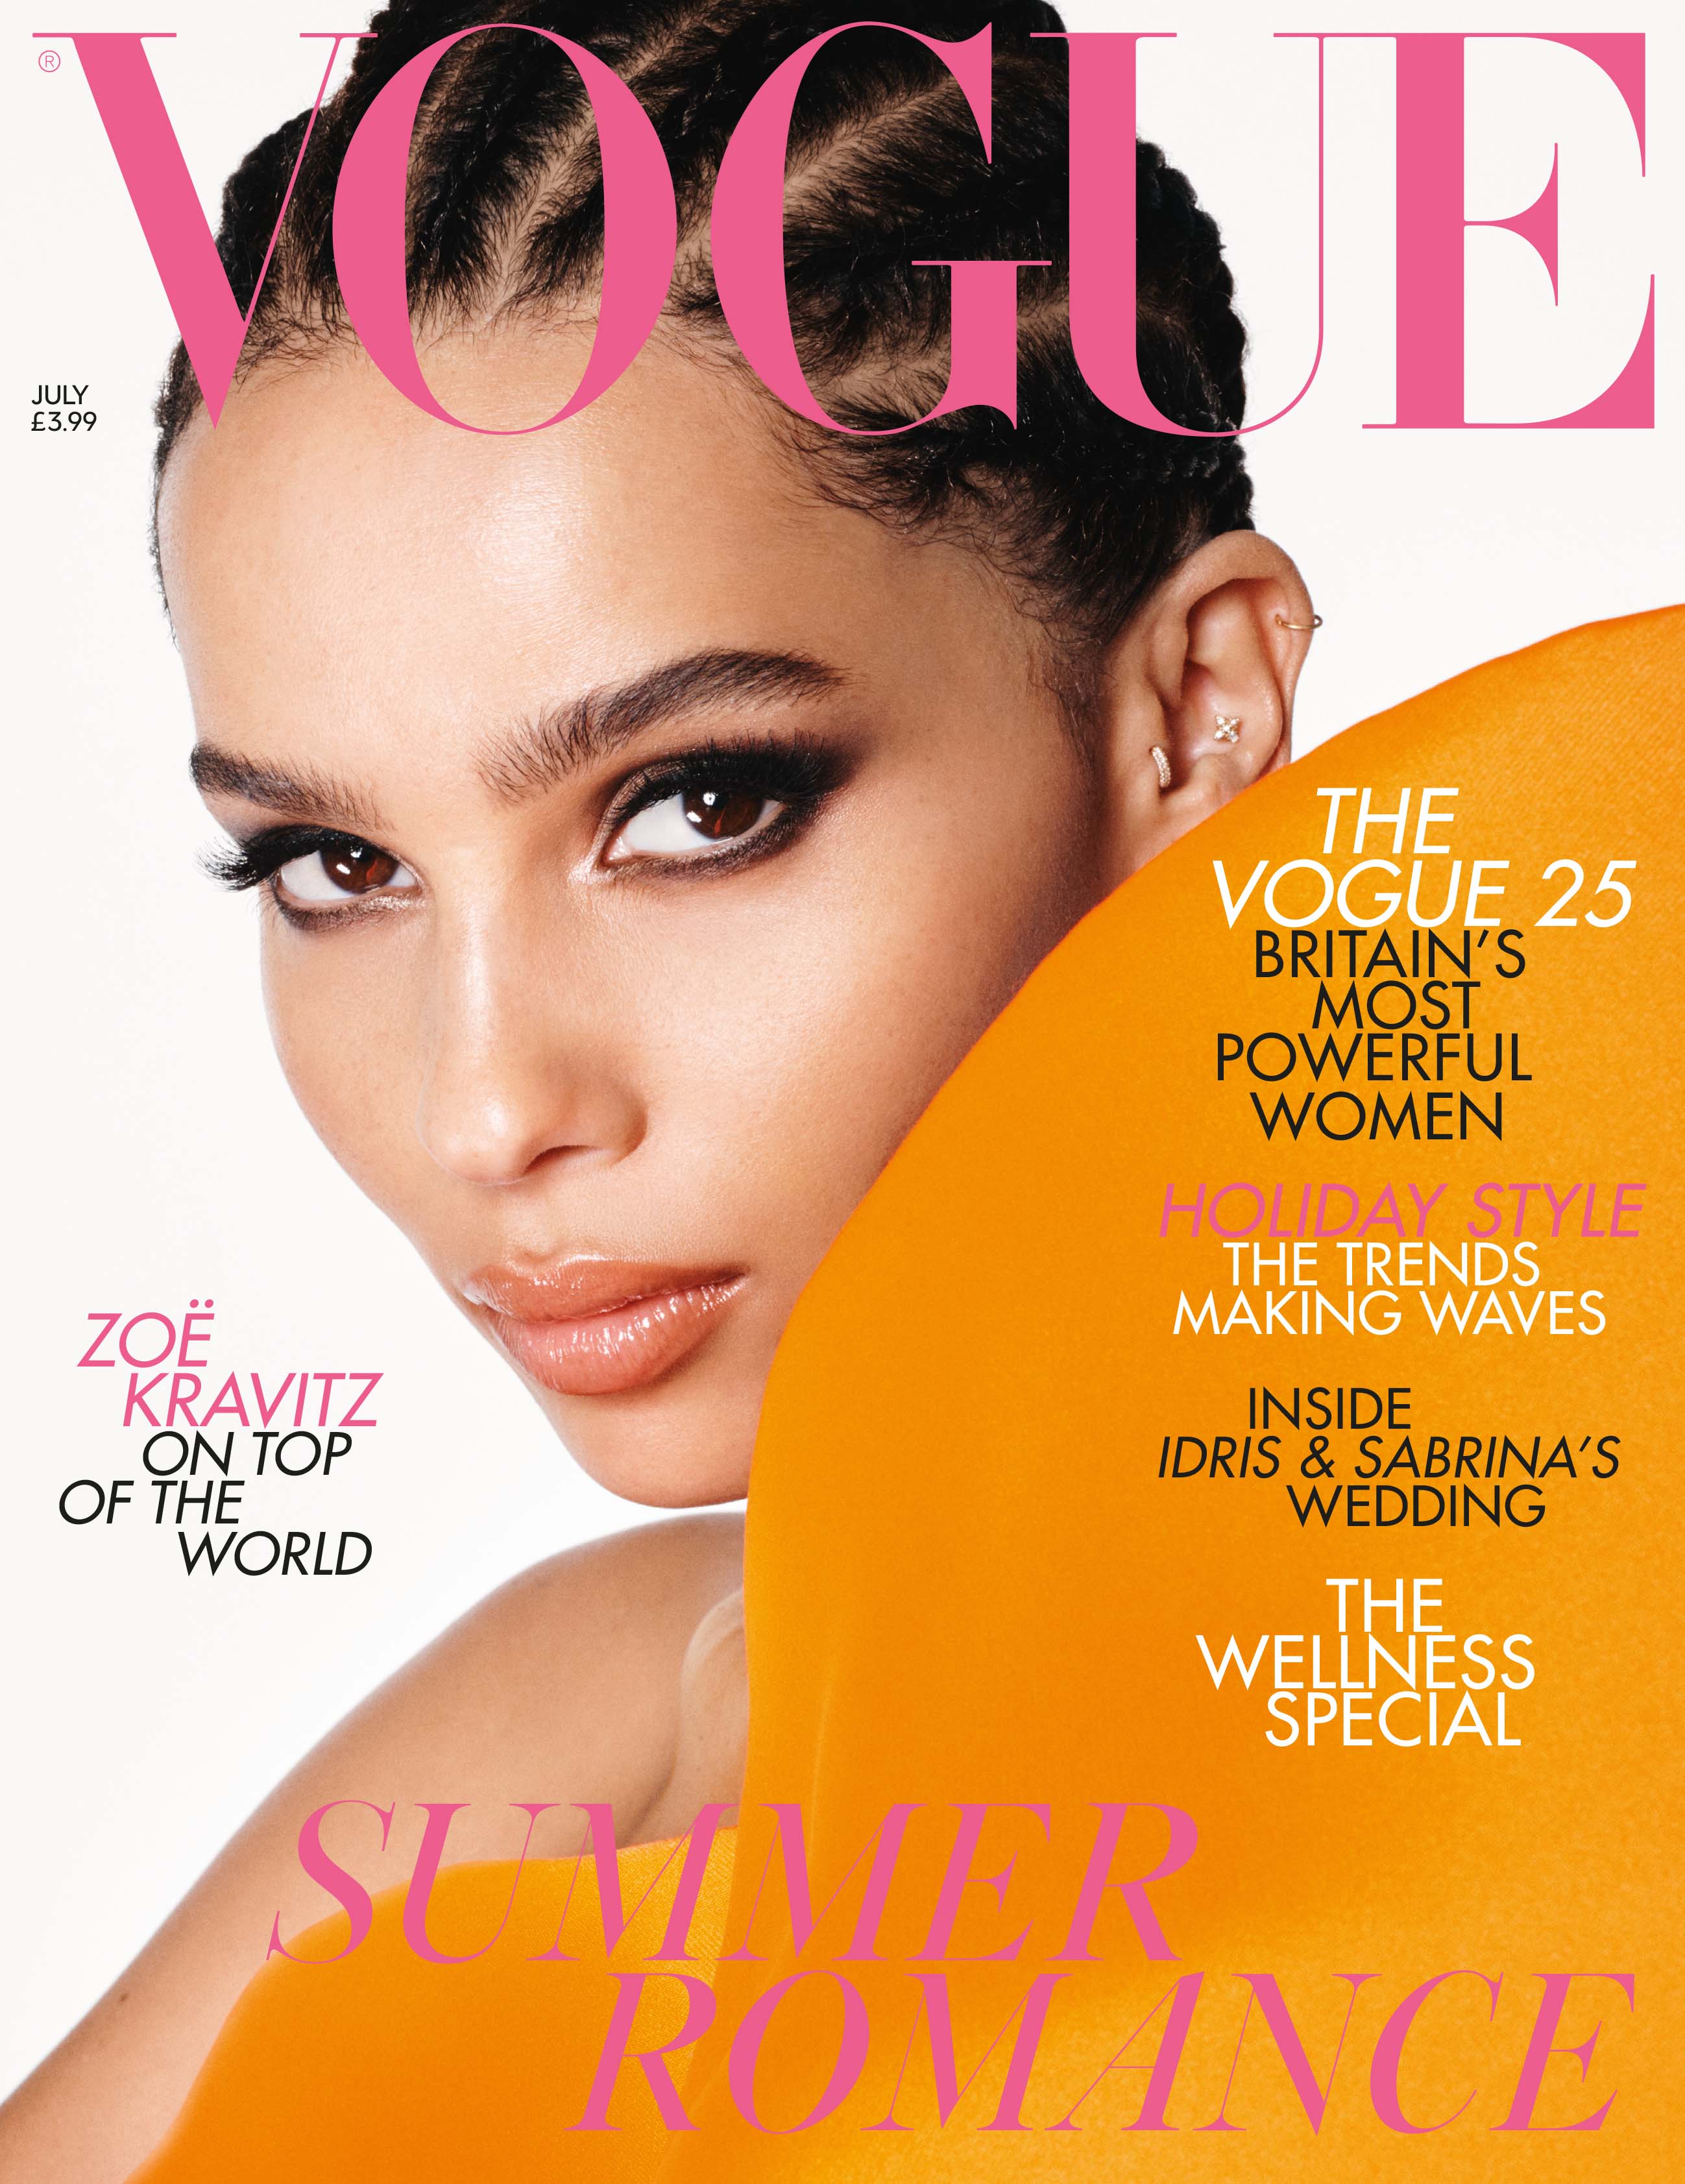 The July issue of British Vogue